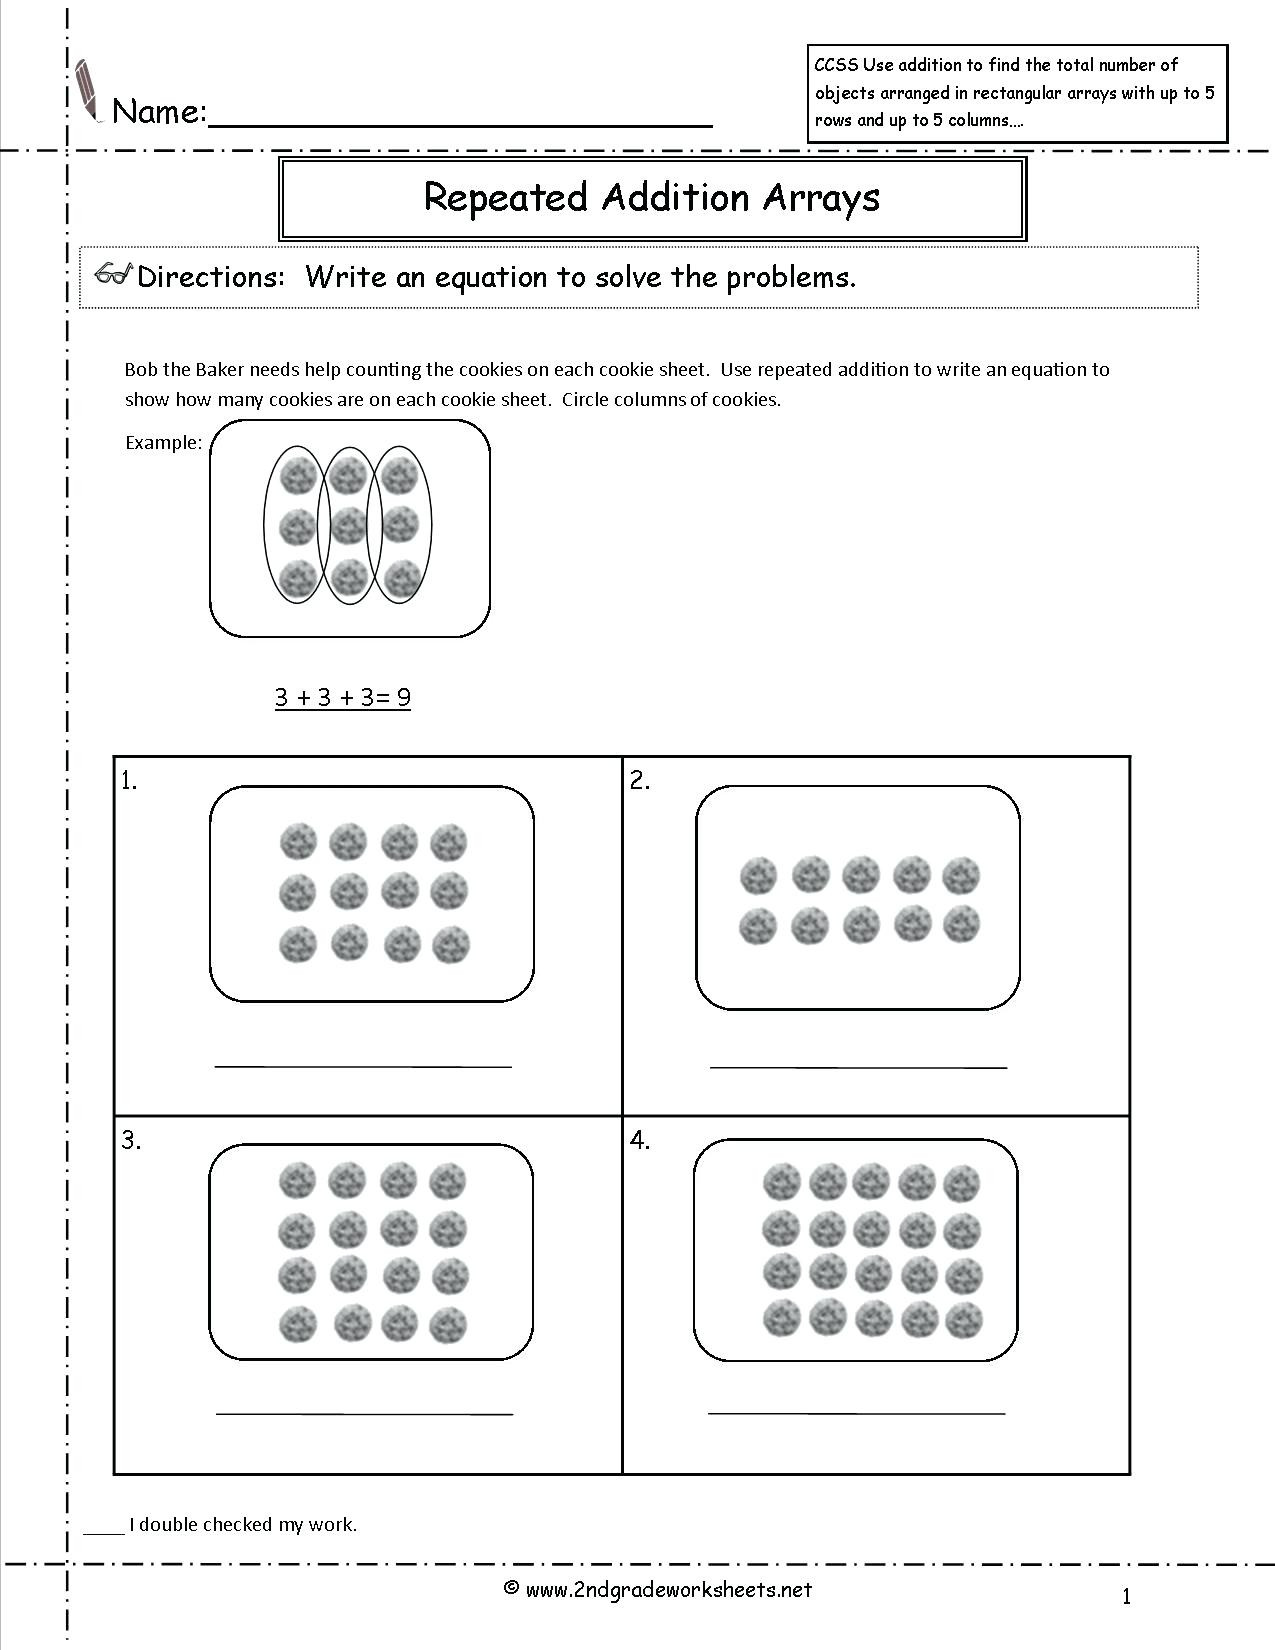 Free Math Worksheets Third Grade 3 Addition Add 3 4 Digit Numbers In Columns